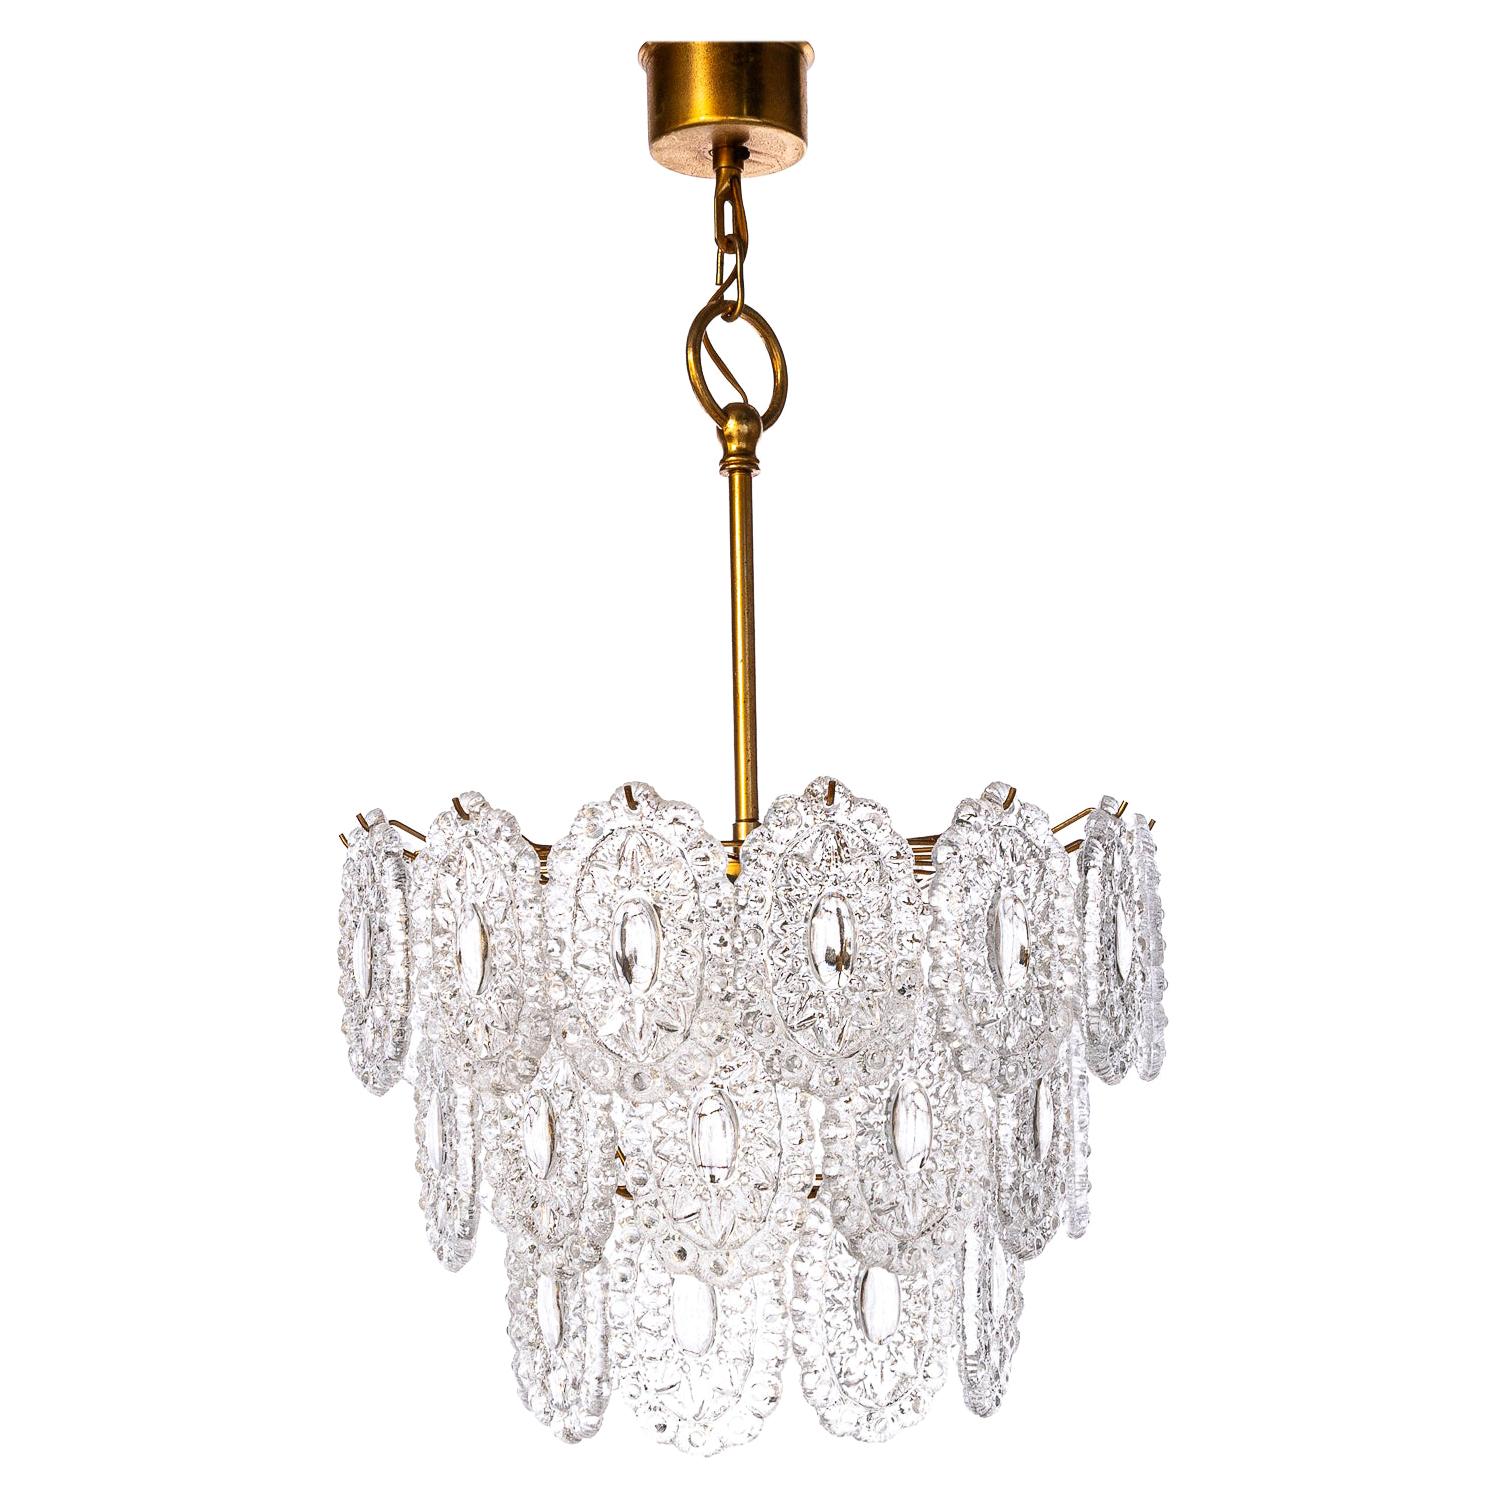 1960's Brass and Glass Chandelier Attributed to Orrefors